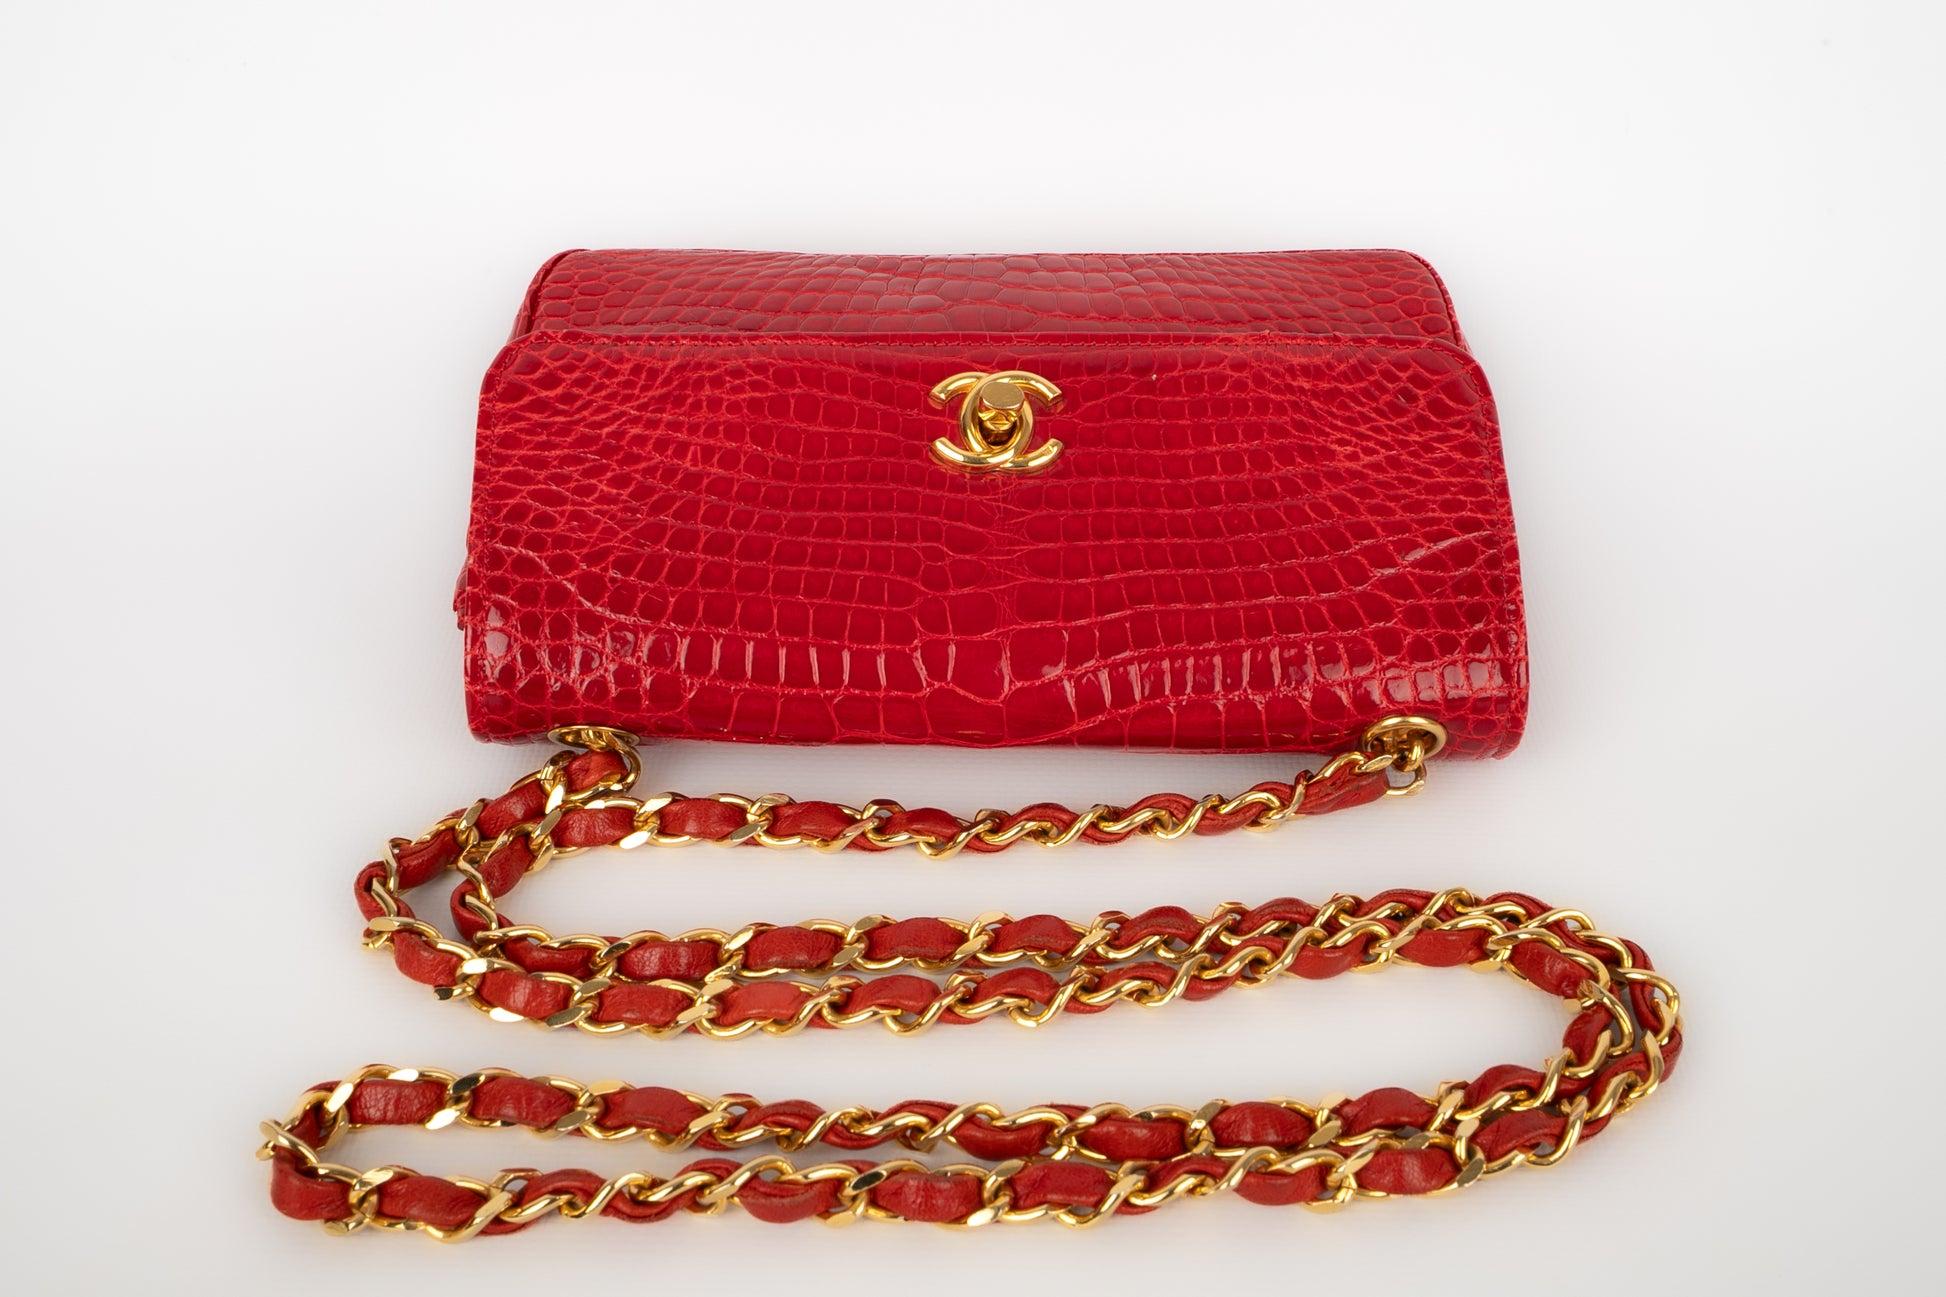 Chanel - (Made in France) Tiny evening bag made of red crocodile exotic leather. No serial number. Piece from the sales.

Additional information:
Condition: Very good condition
Dimensions: Width: 19 cm - Height: 12 cm - Depth: 5 cm - Handle: 115